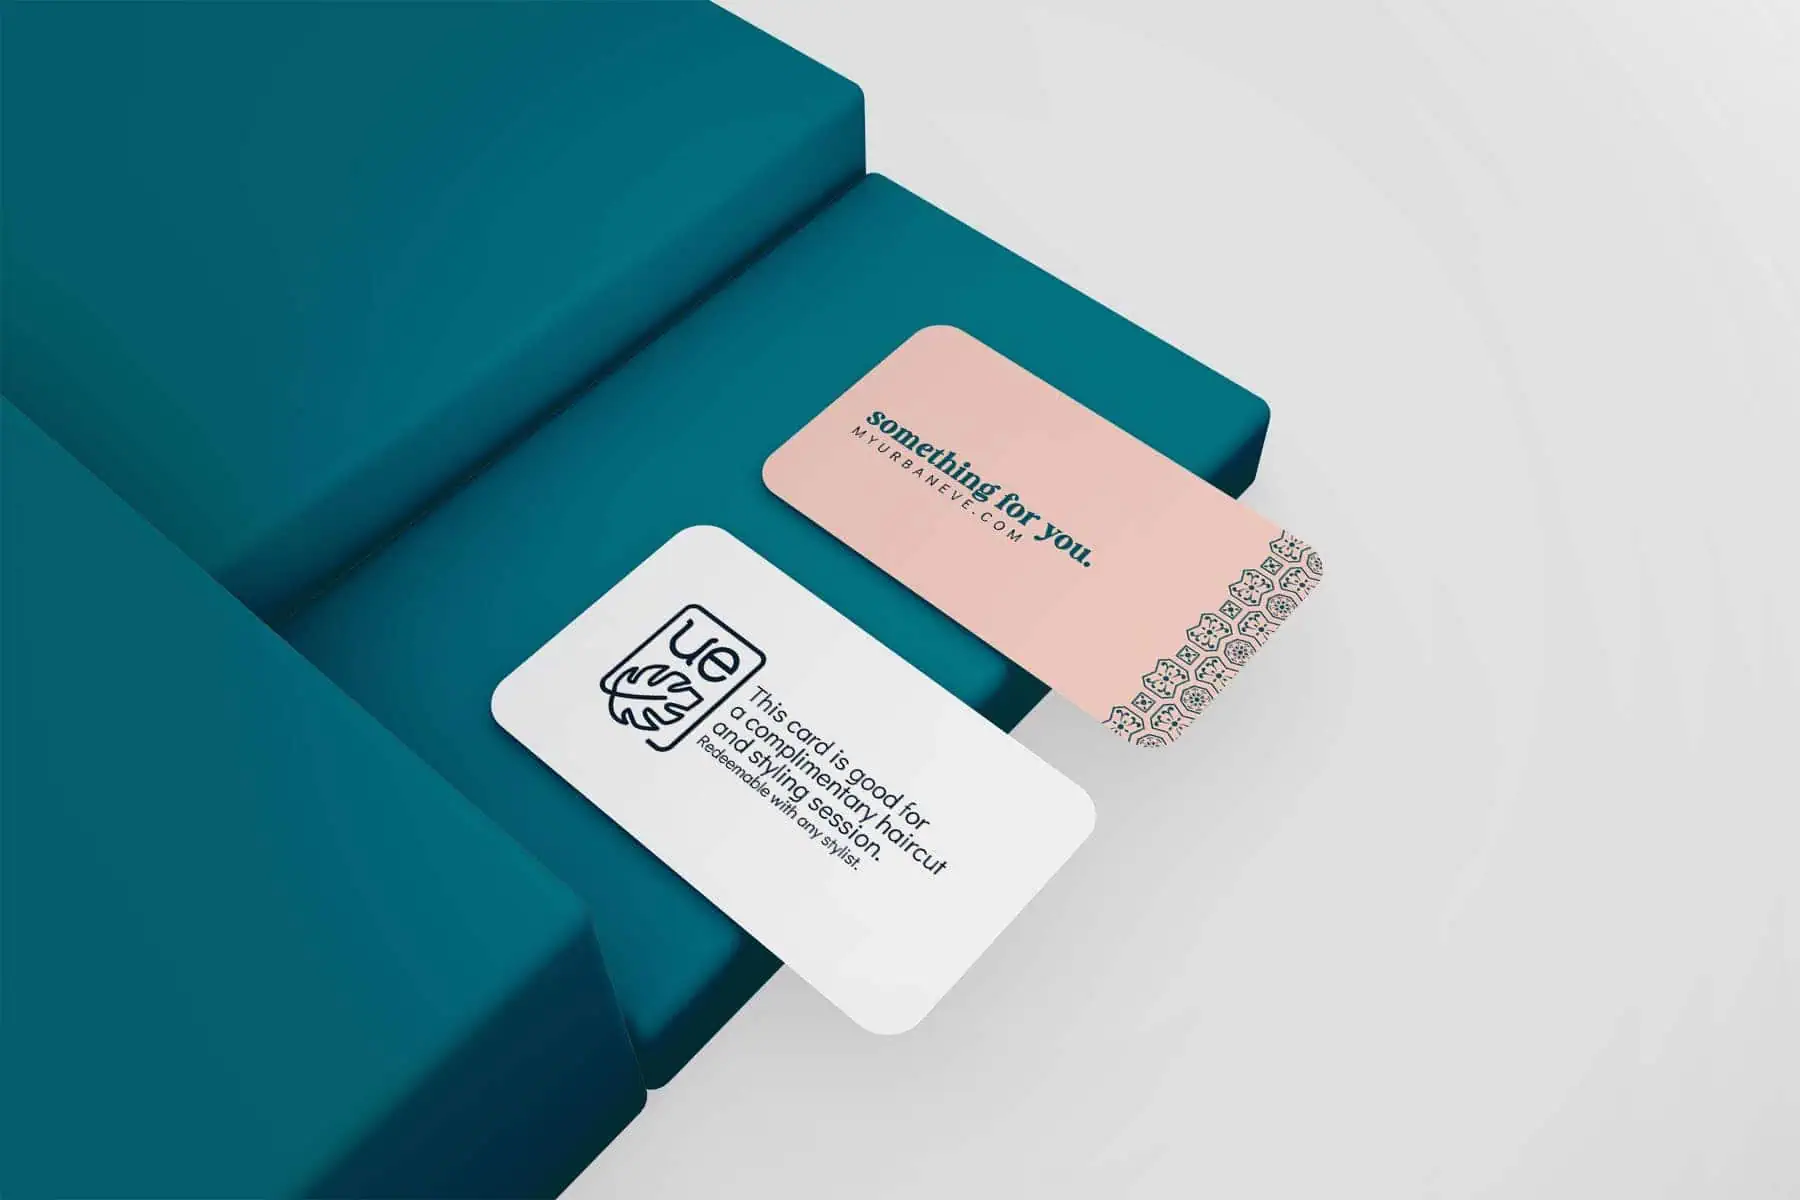 Two business cards placed on teal rectangular blocks. The upper card is pink and reads "something for you. urbaneve.com" with a decorative border. The lower card is white with a logo and text. MDT designs and prints a variety of marketing materials. - Market Design Team: Define. Structure. Expand.